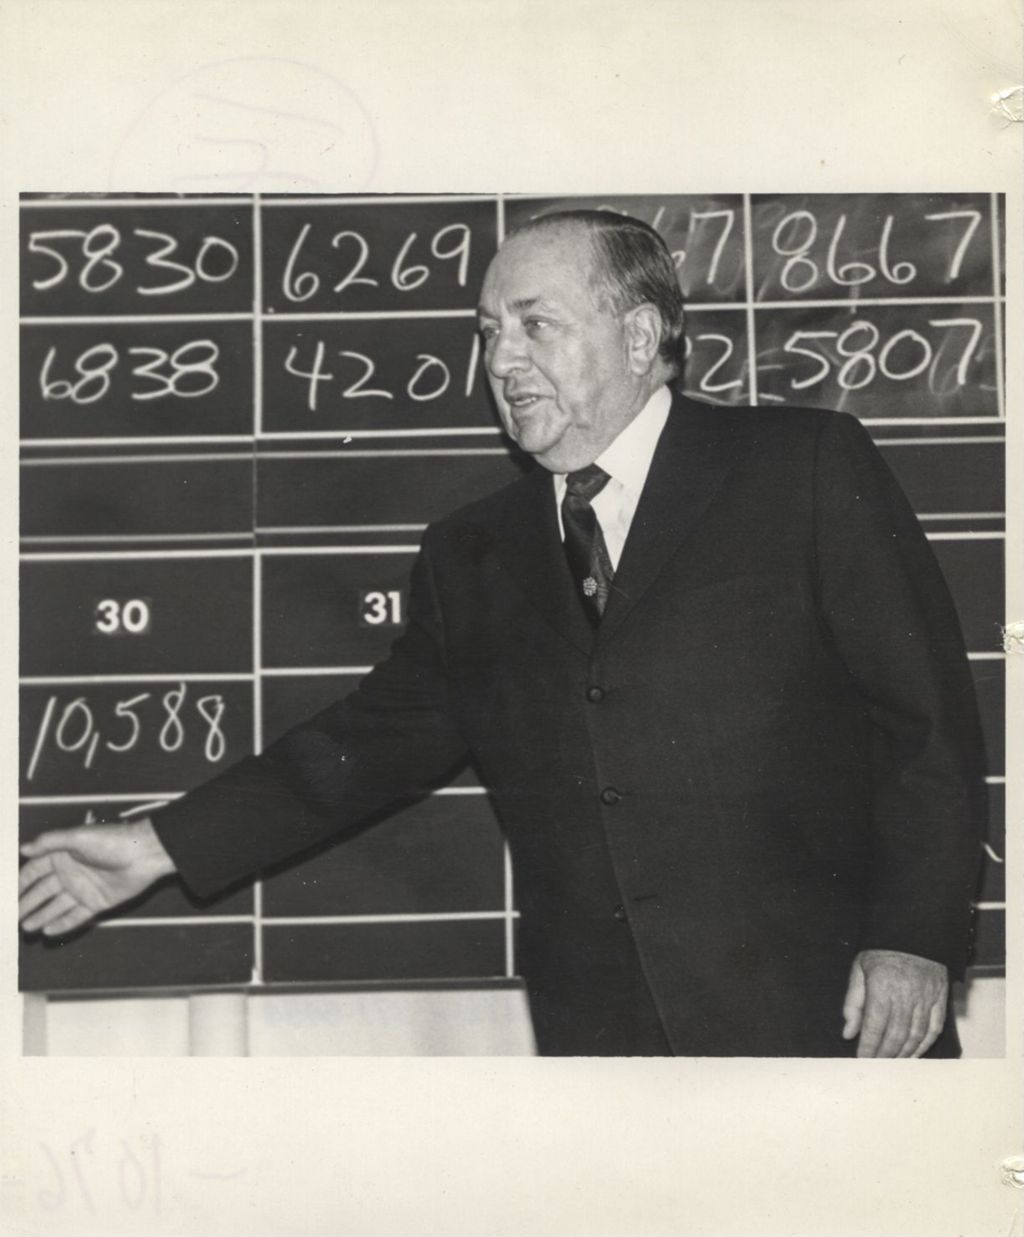 Miniature of Richard J. Daley in front of a blackboard of election tallies during a "We Care" election event